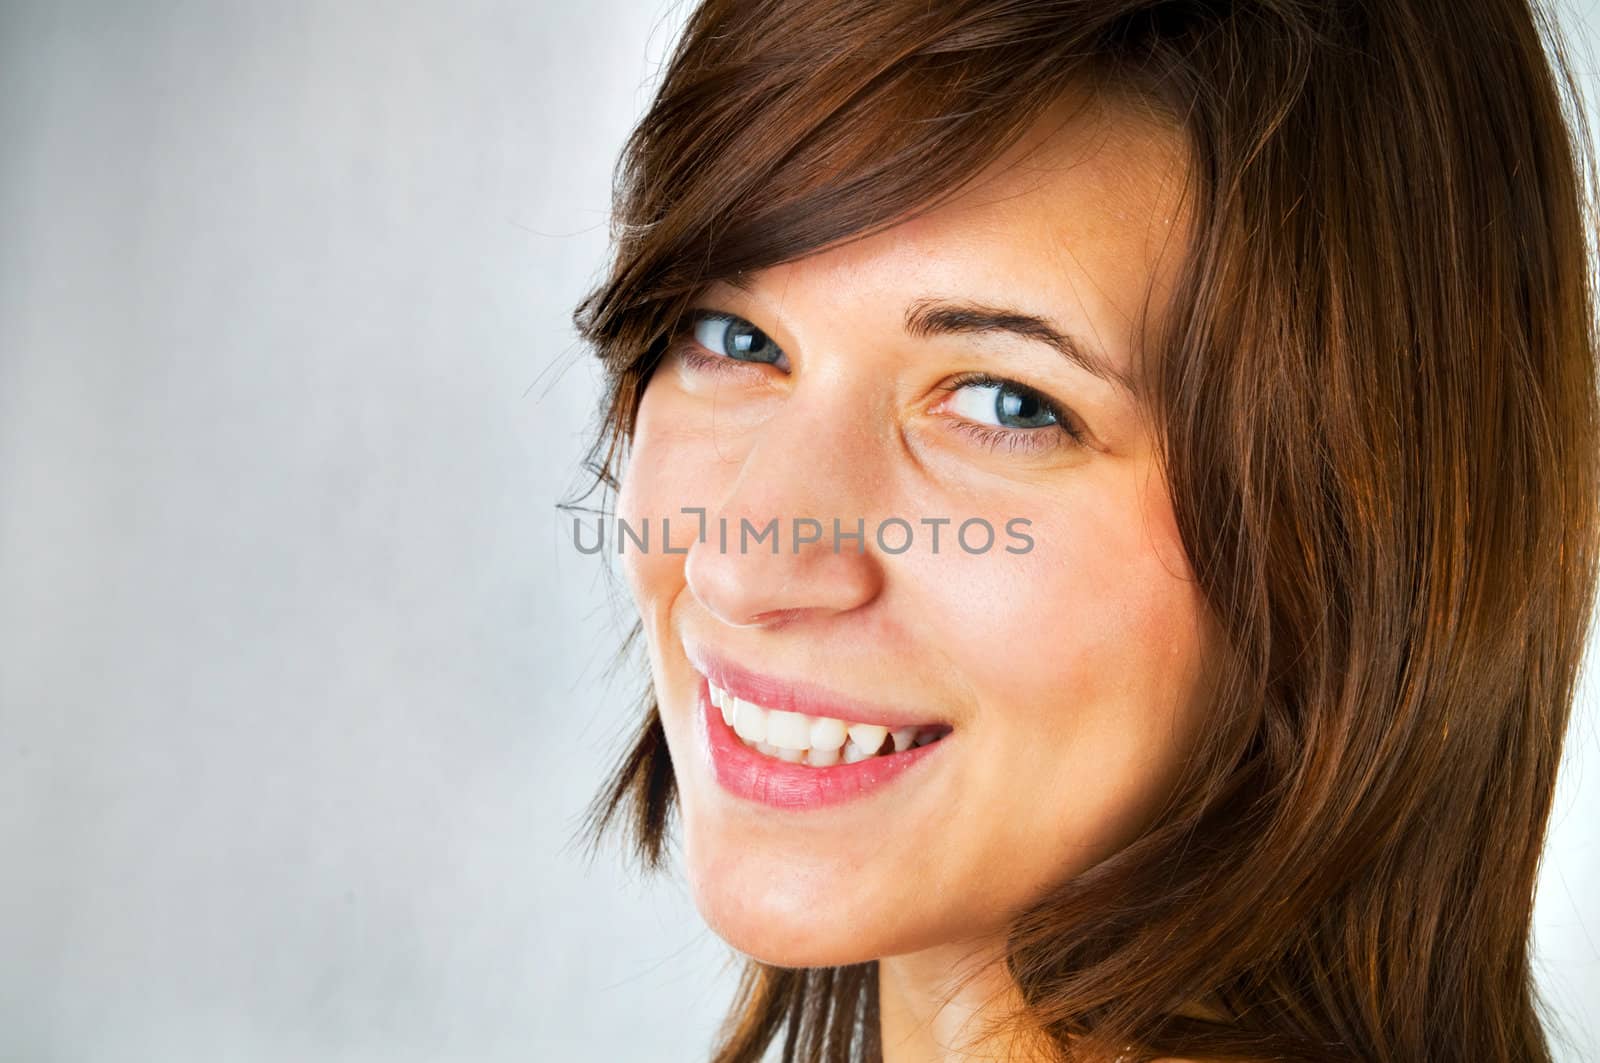 Young, smiling teenage girl by photocreo